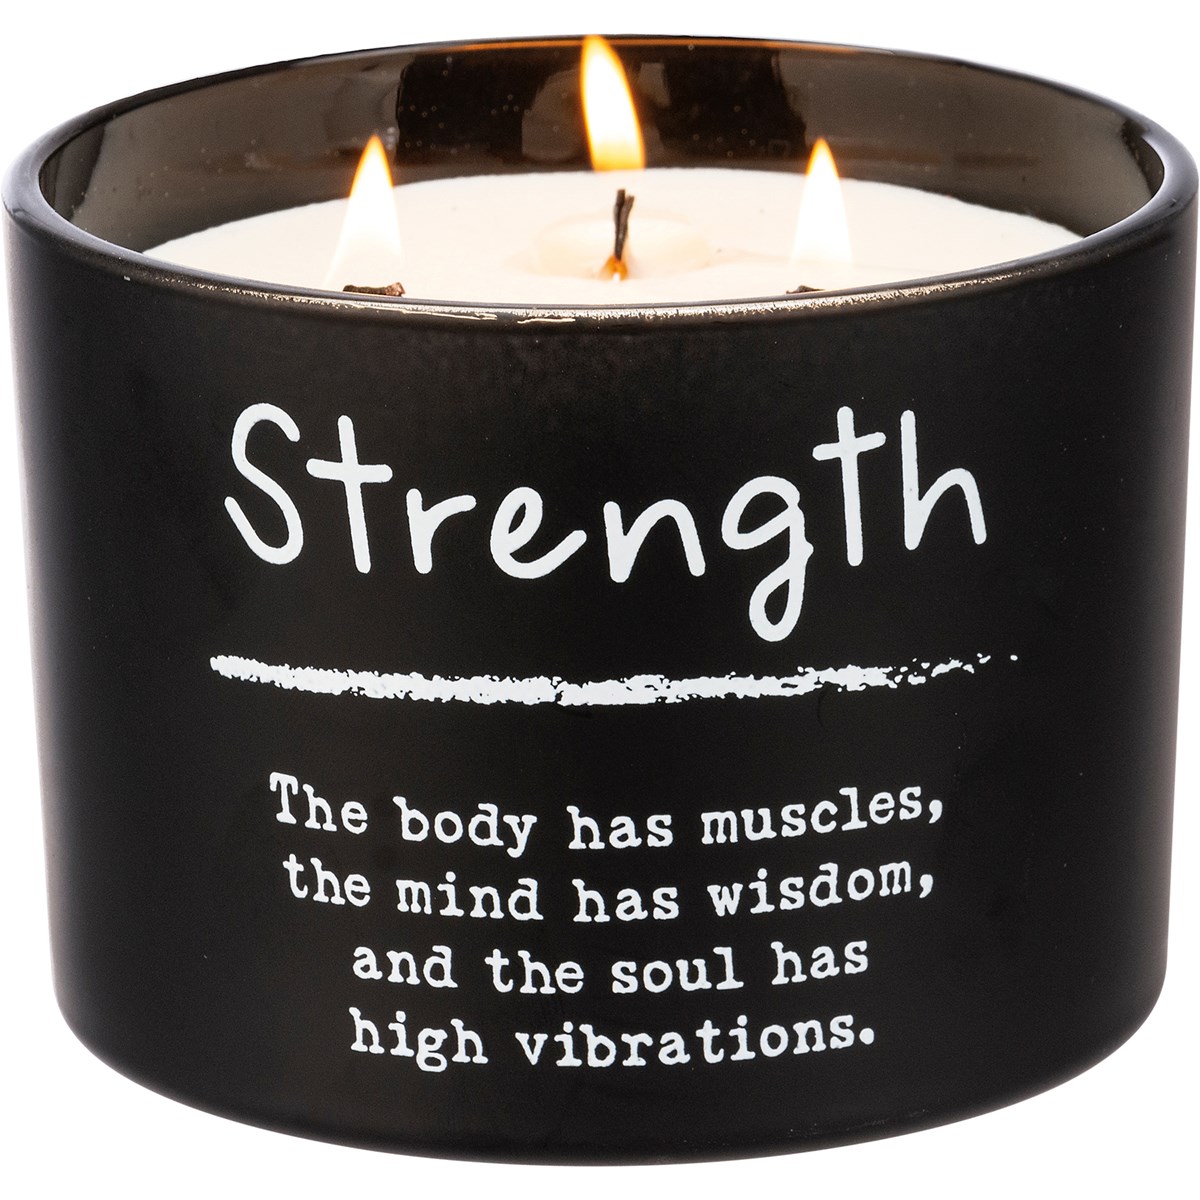 Strength Jar Candle - Soy Wax, Glass, Wood